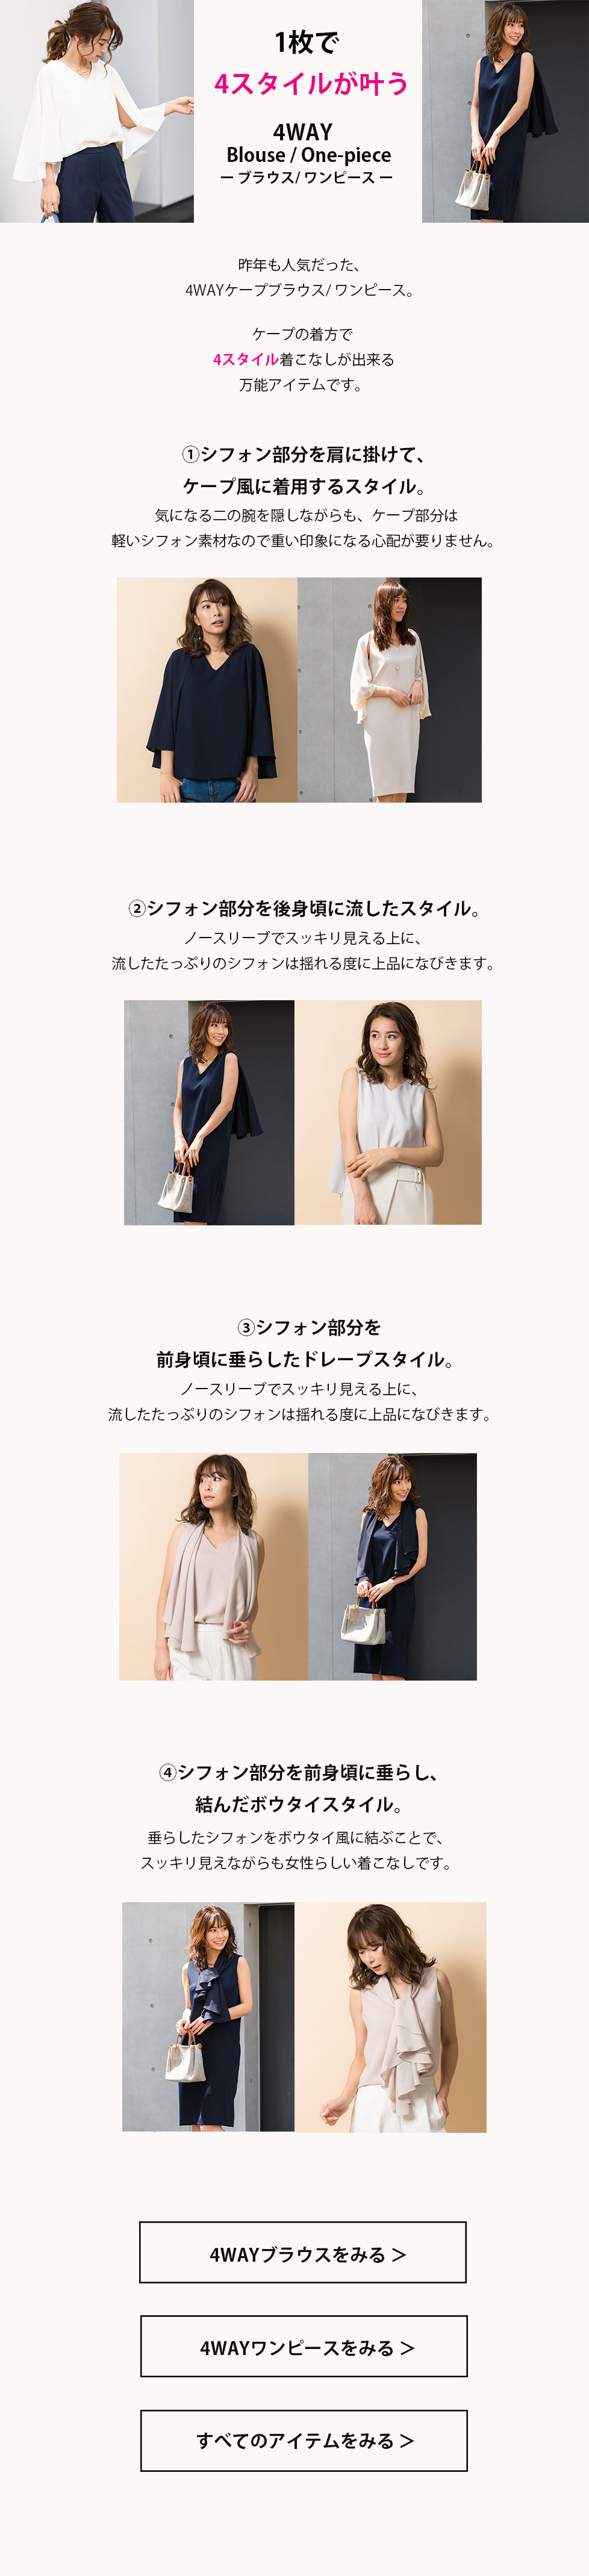 '4WAY Blouse/One-piece